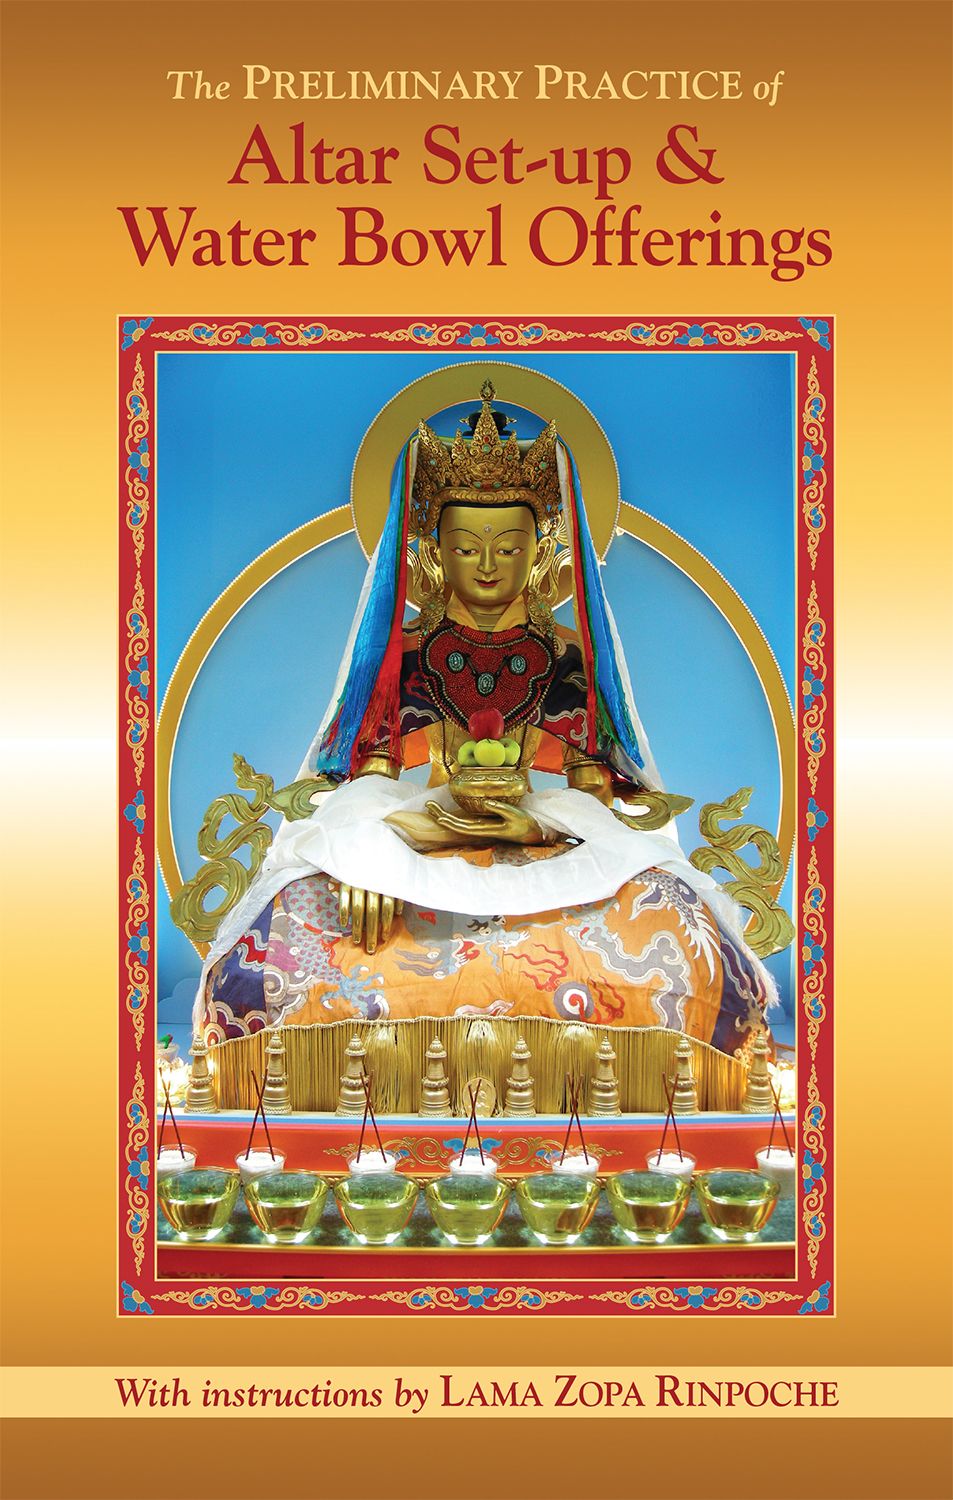 Available in Print! The Preliminary Practice of Altar Set-up & Water Bowl Offerings